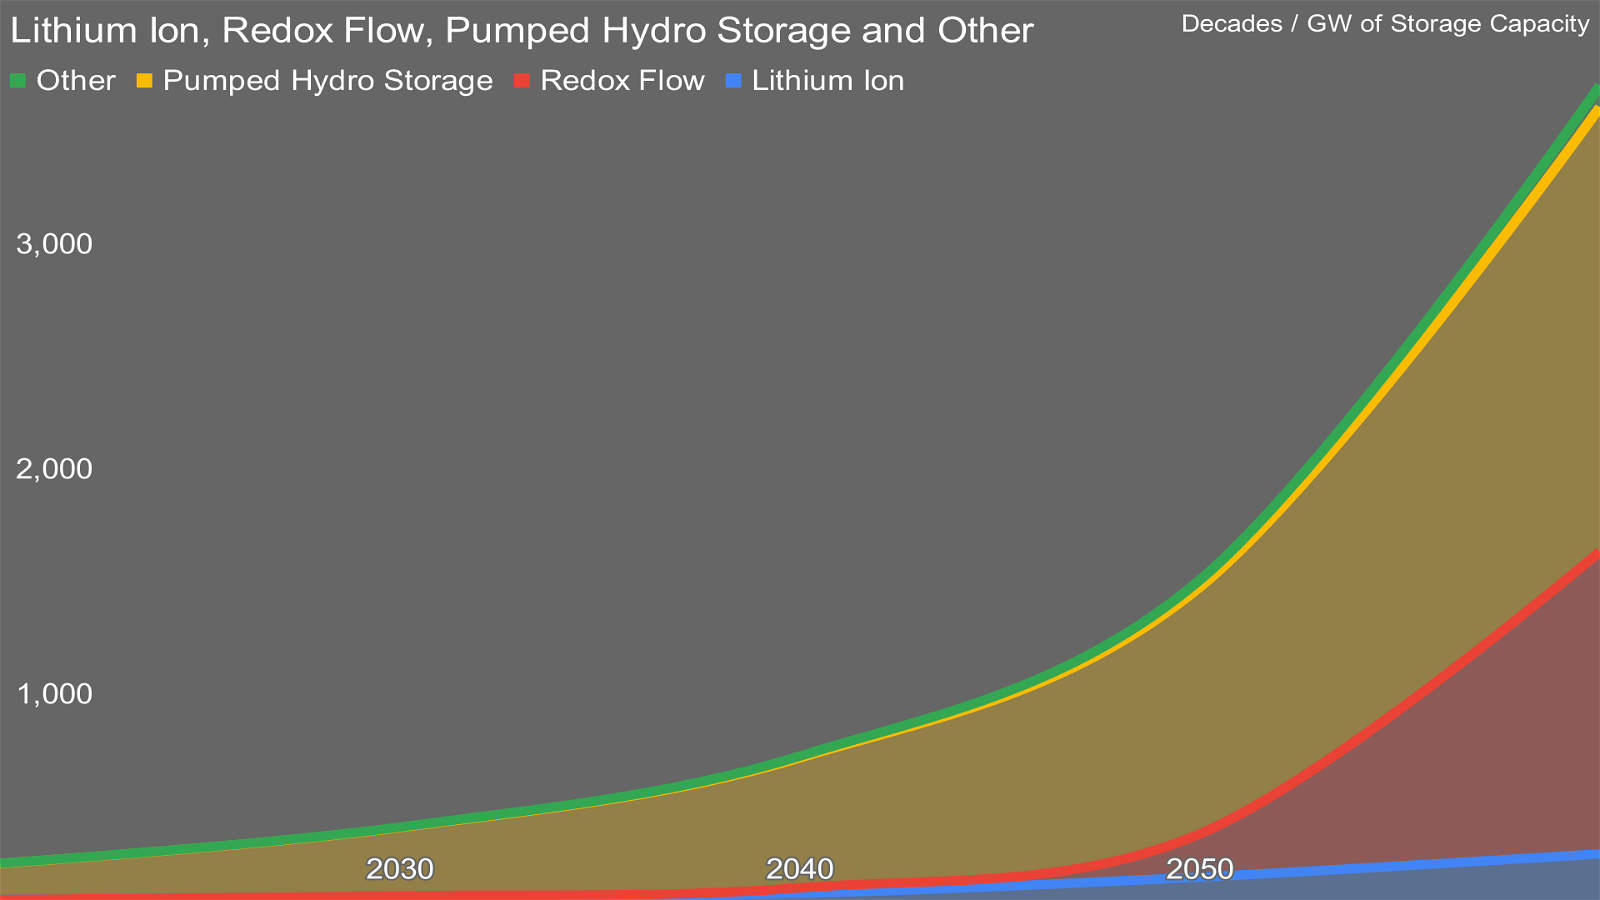 Chart 2: Evolution of storage capacity by technology (in GW). Chart by the author